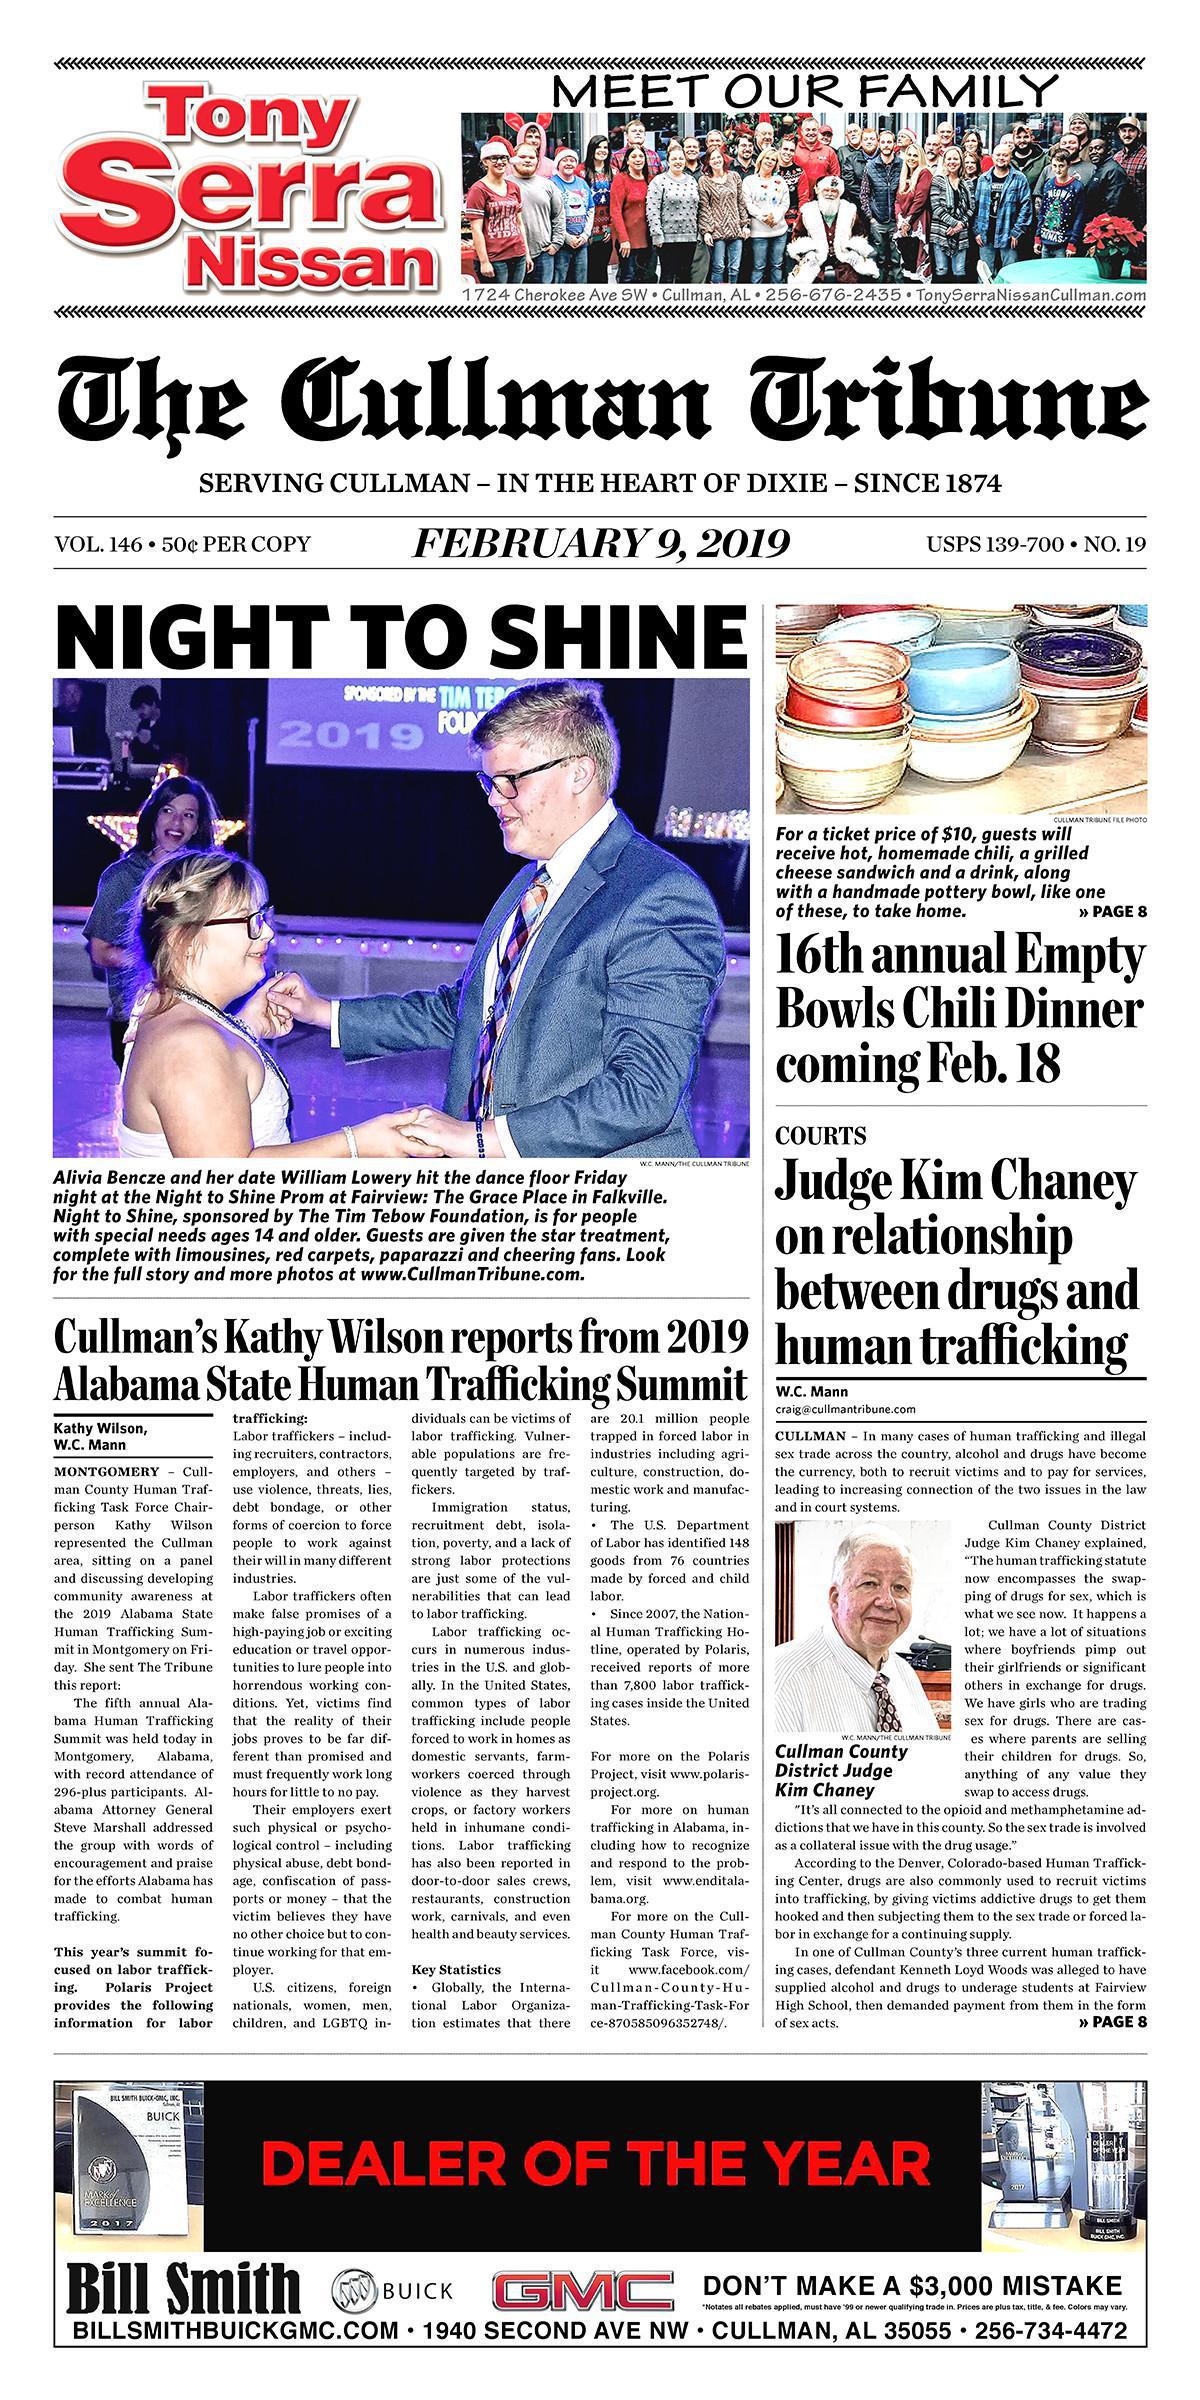 Good Morning Cullman! The 02-09-2019 edition of the Cullman Tribune is now ready to view